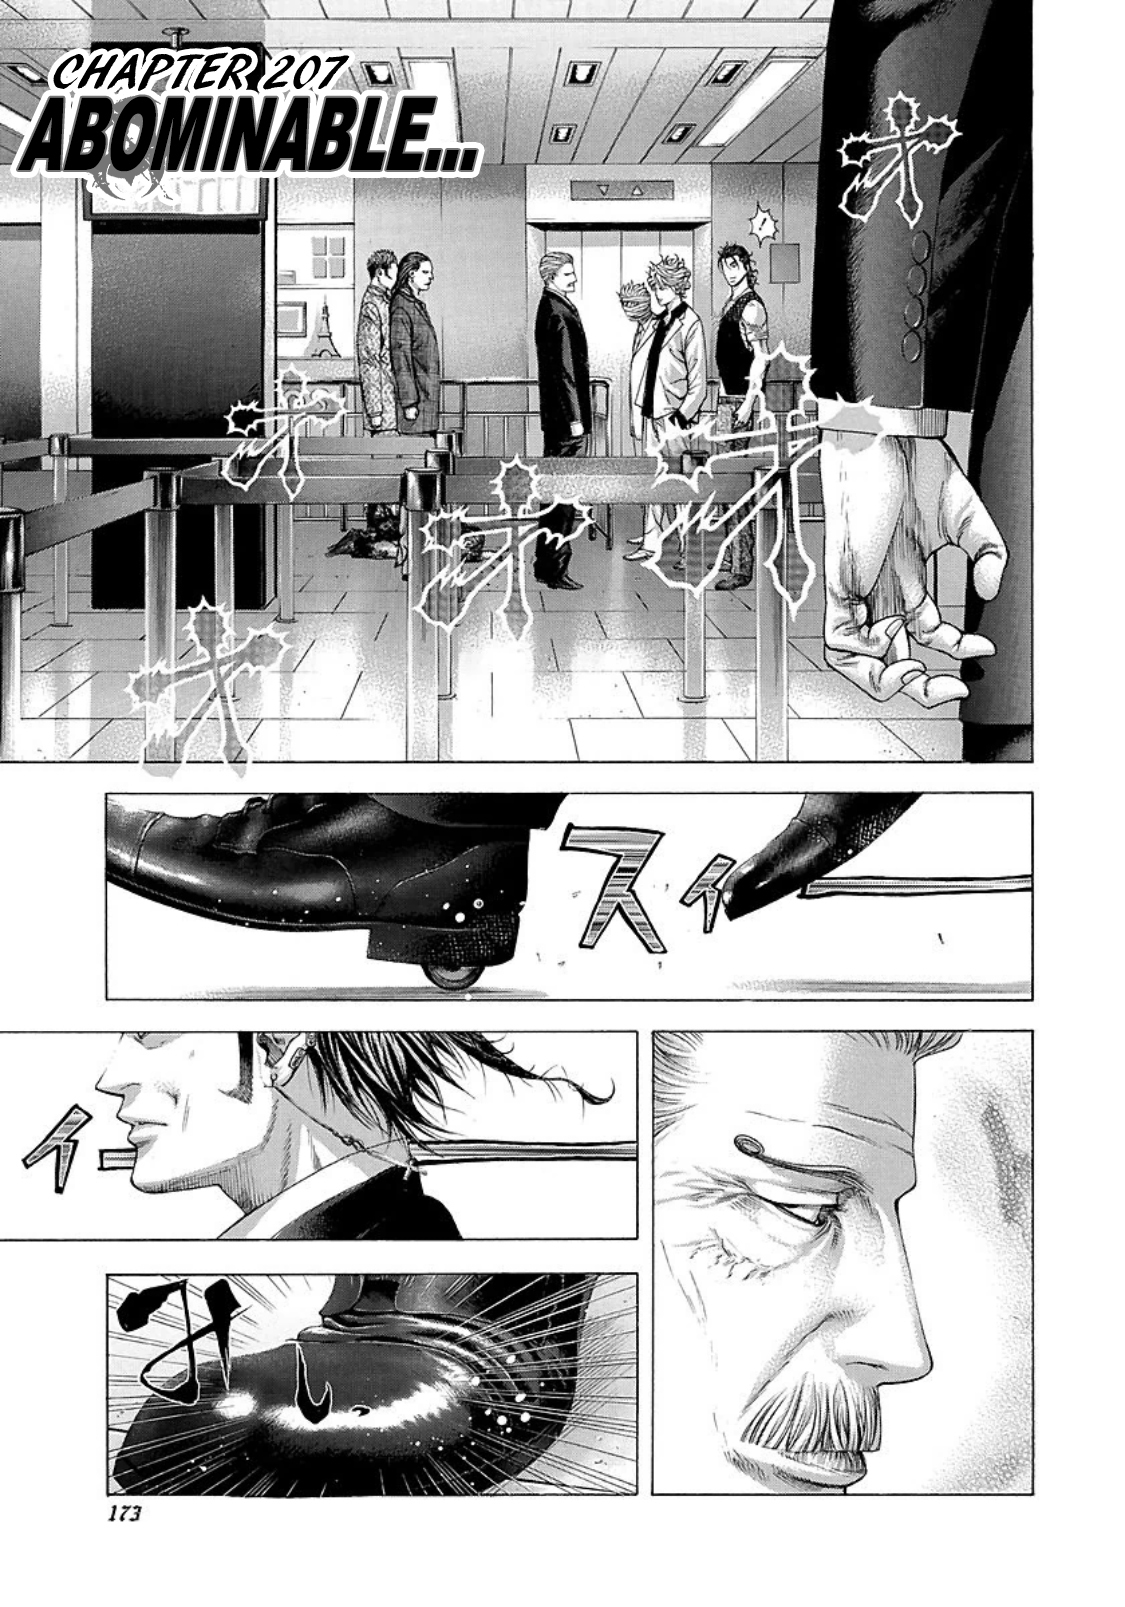 Usogui Chapter 207: Abominable... - Picture 1